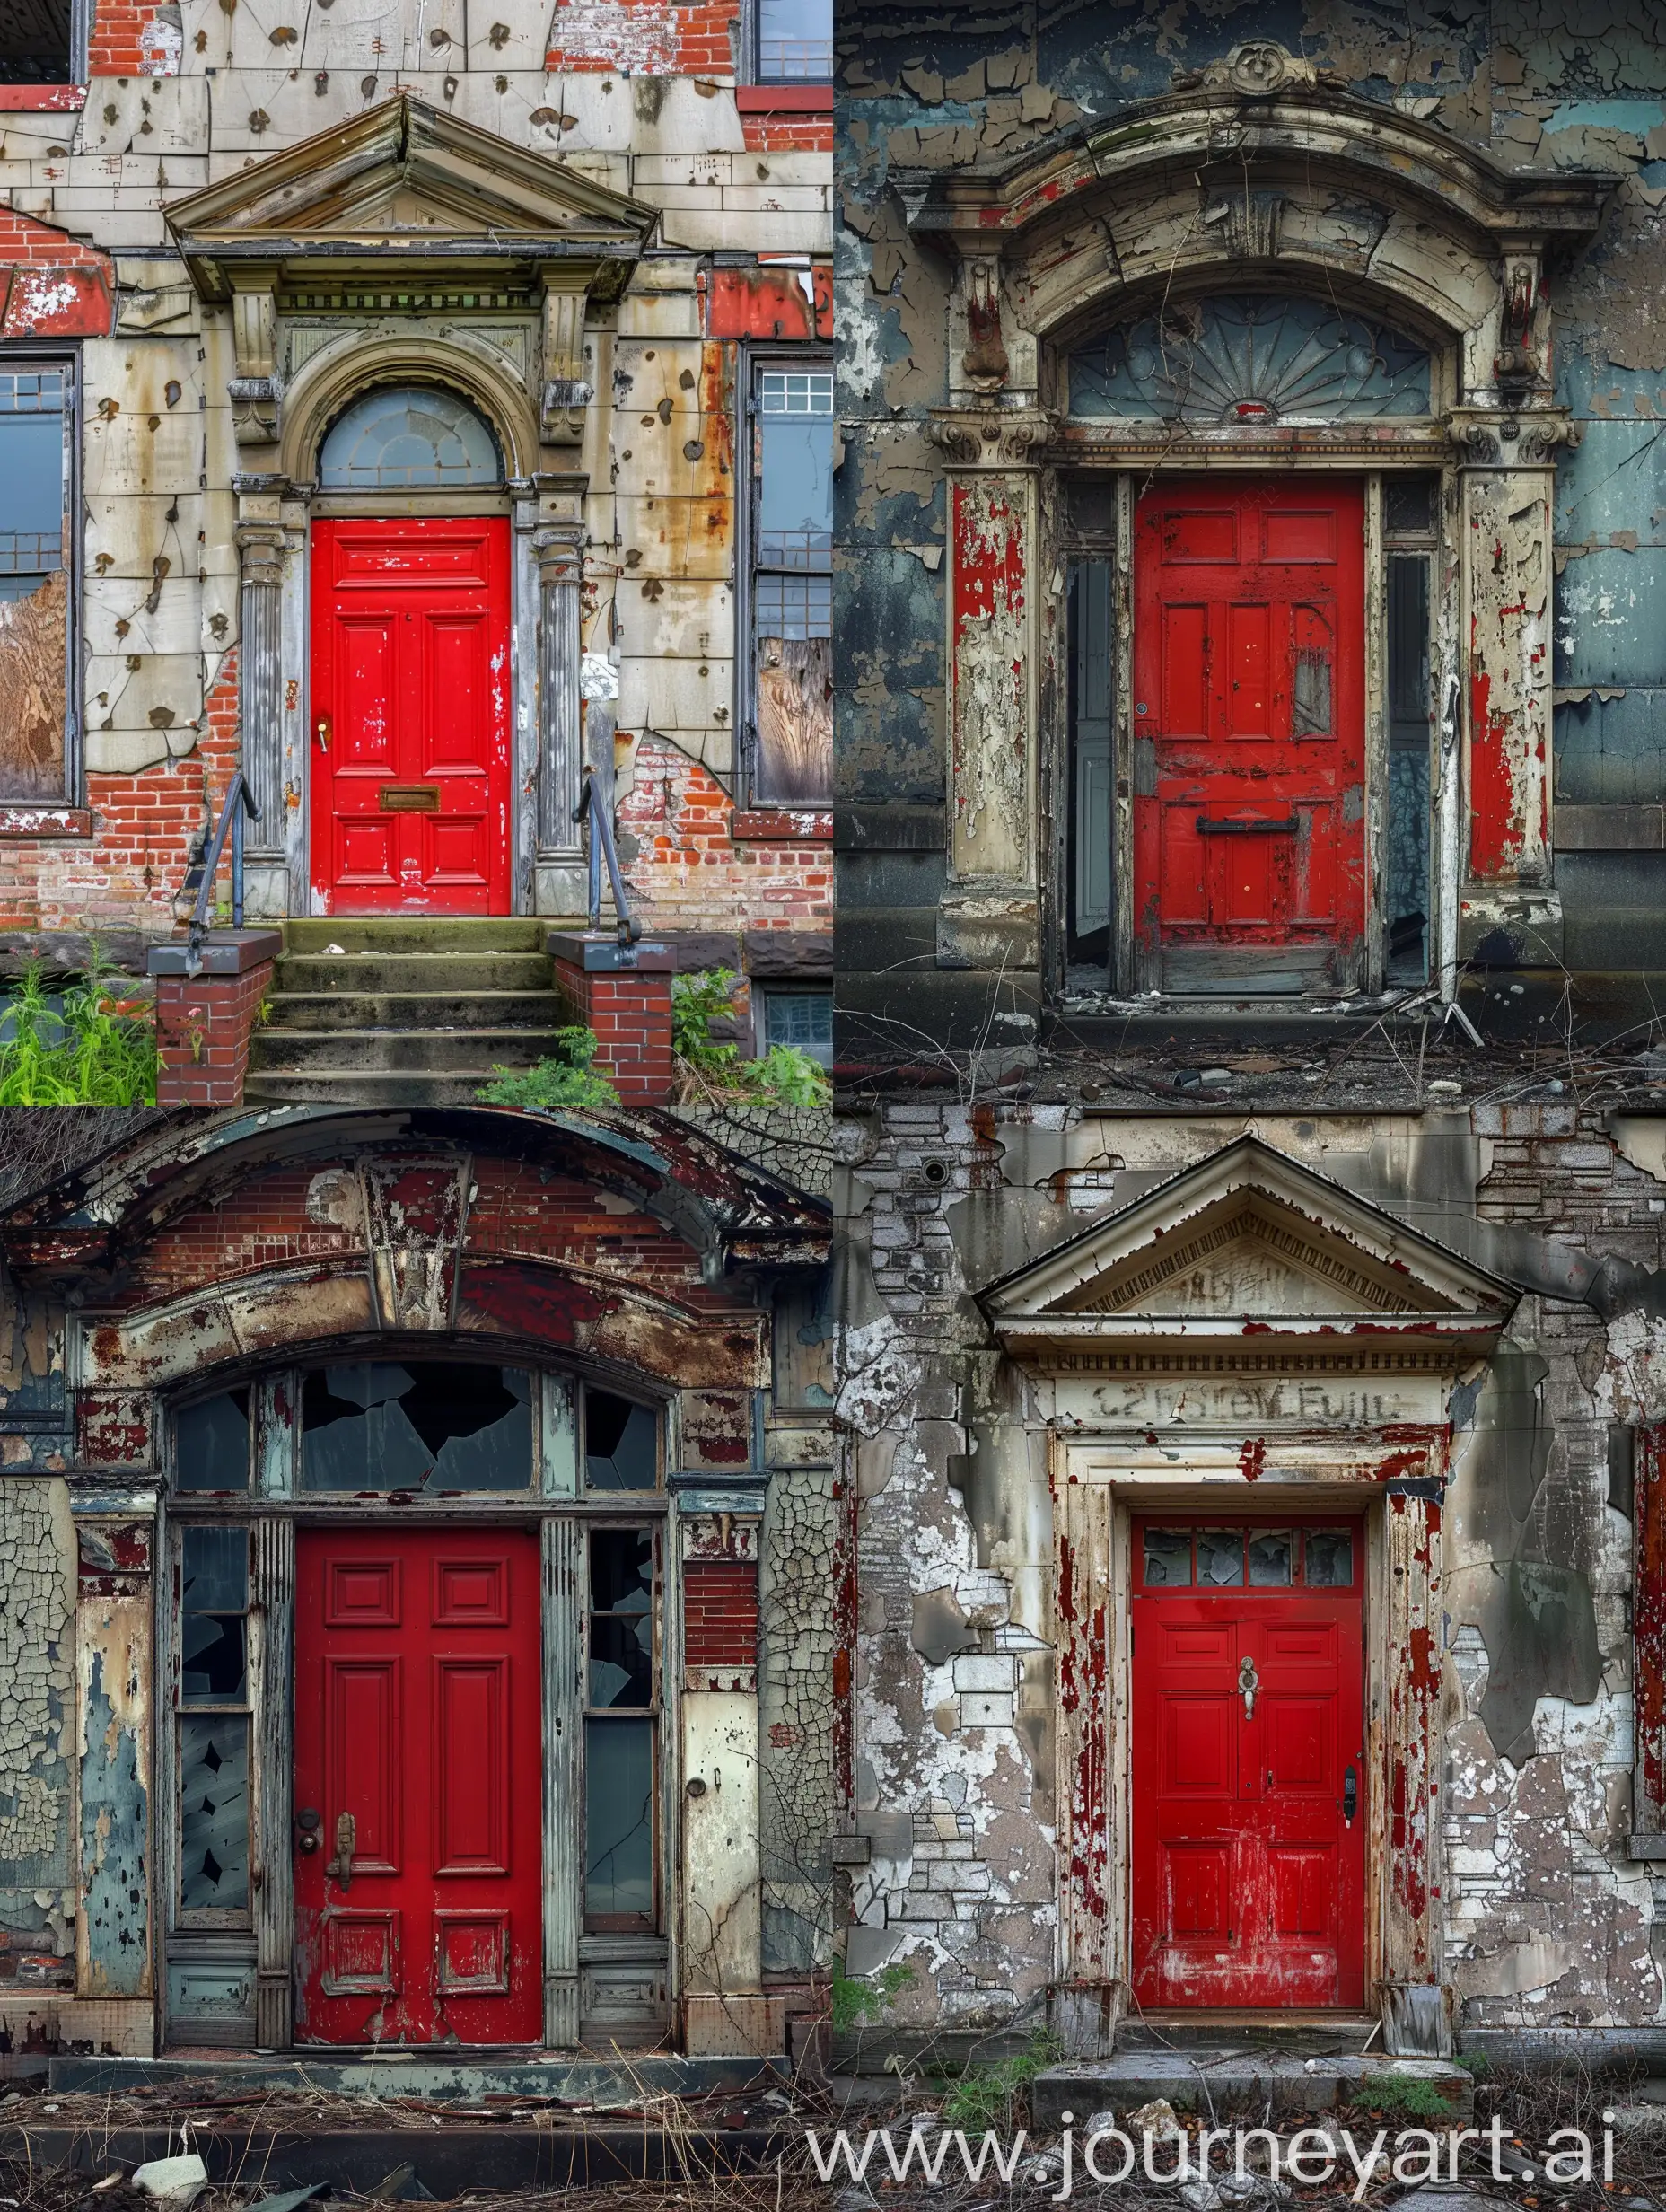 An old, decrepit mansion; Its once grand exterior now marred by years of neglect and decay. Only one feature remained untouched - a vibrant red door, standing stark against the crumbling facade.